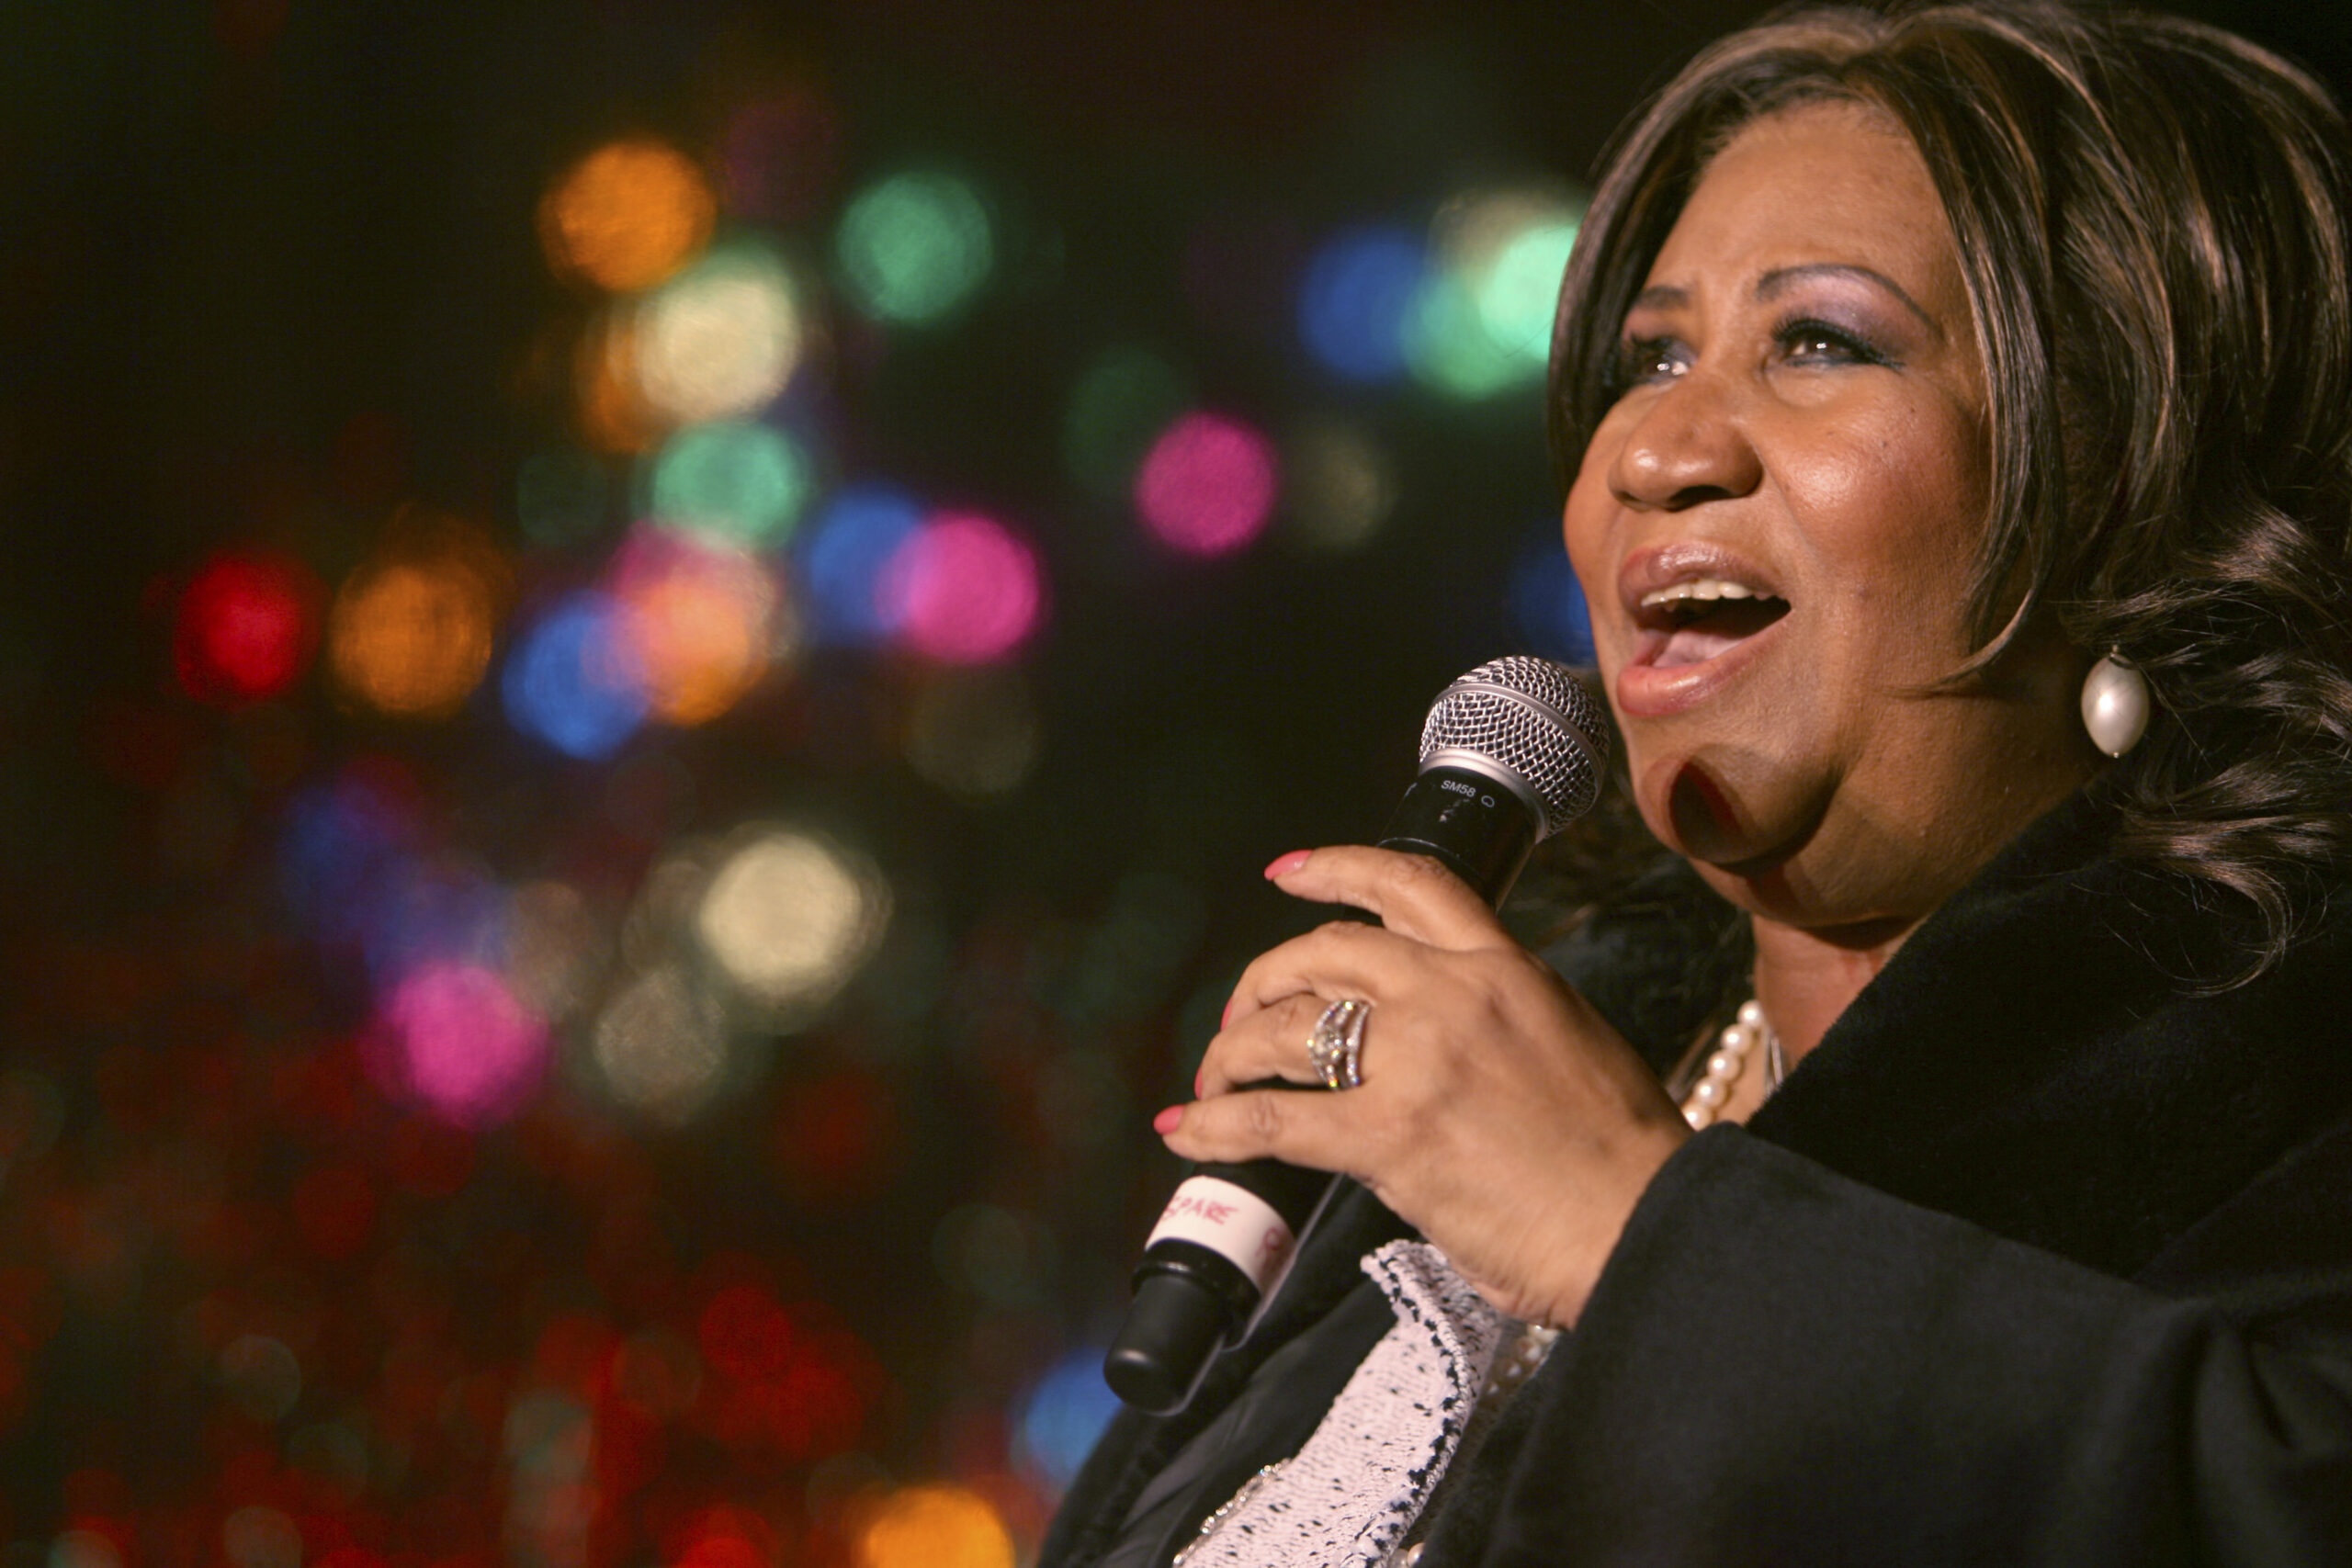 FILE - In this Dec. 4, 2008 file photo, Aretha Franklin performs during the 85th annual Christmas t...